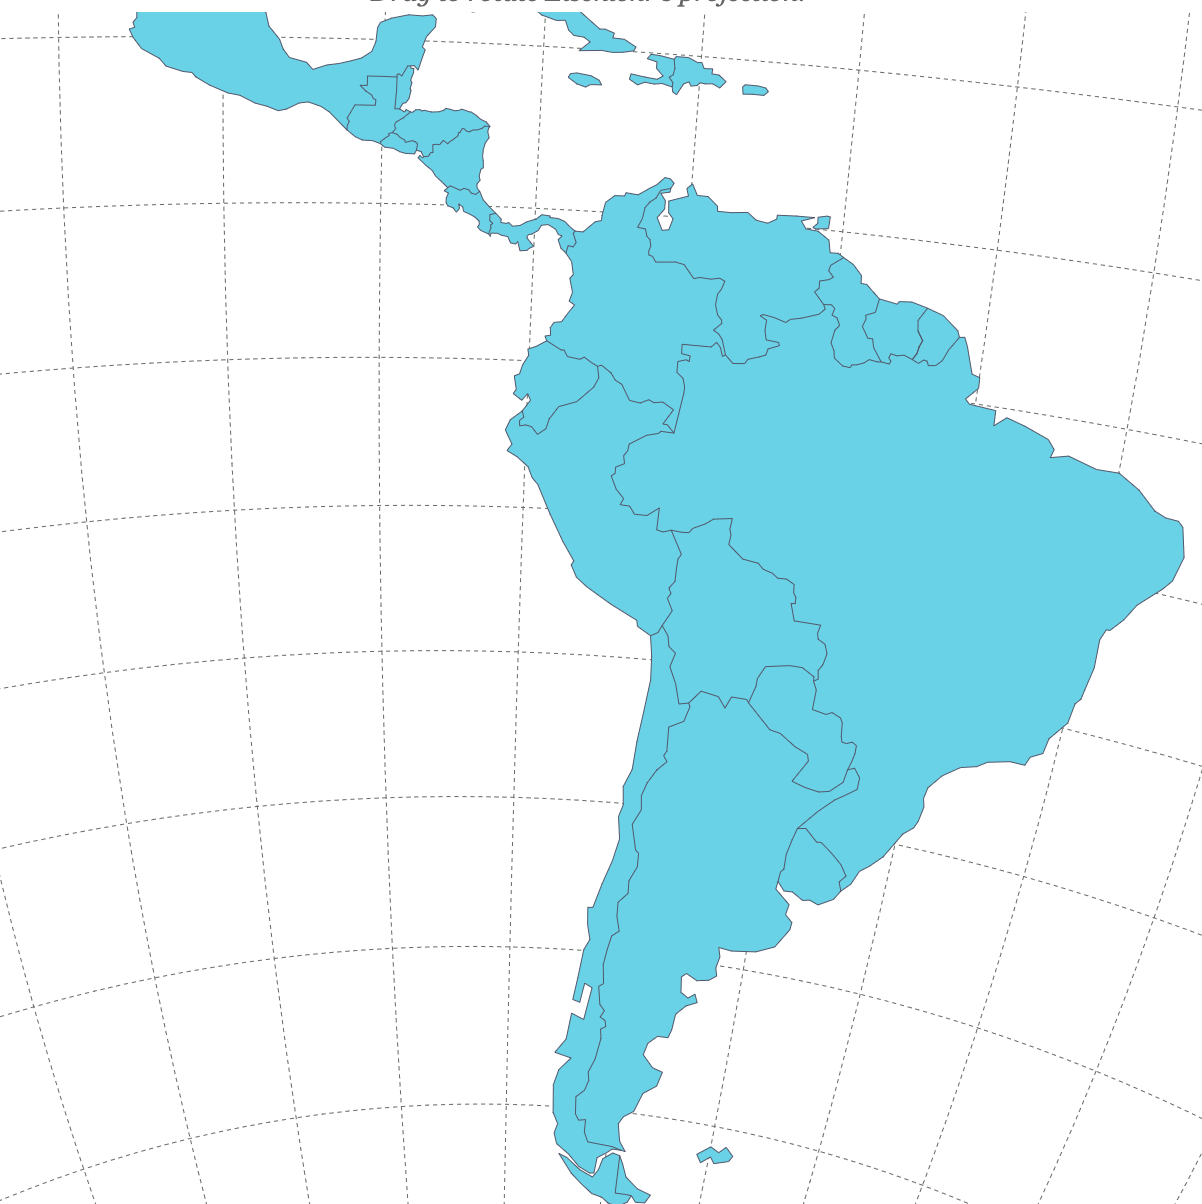 South America (15+ areas)